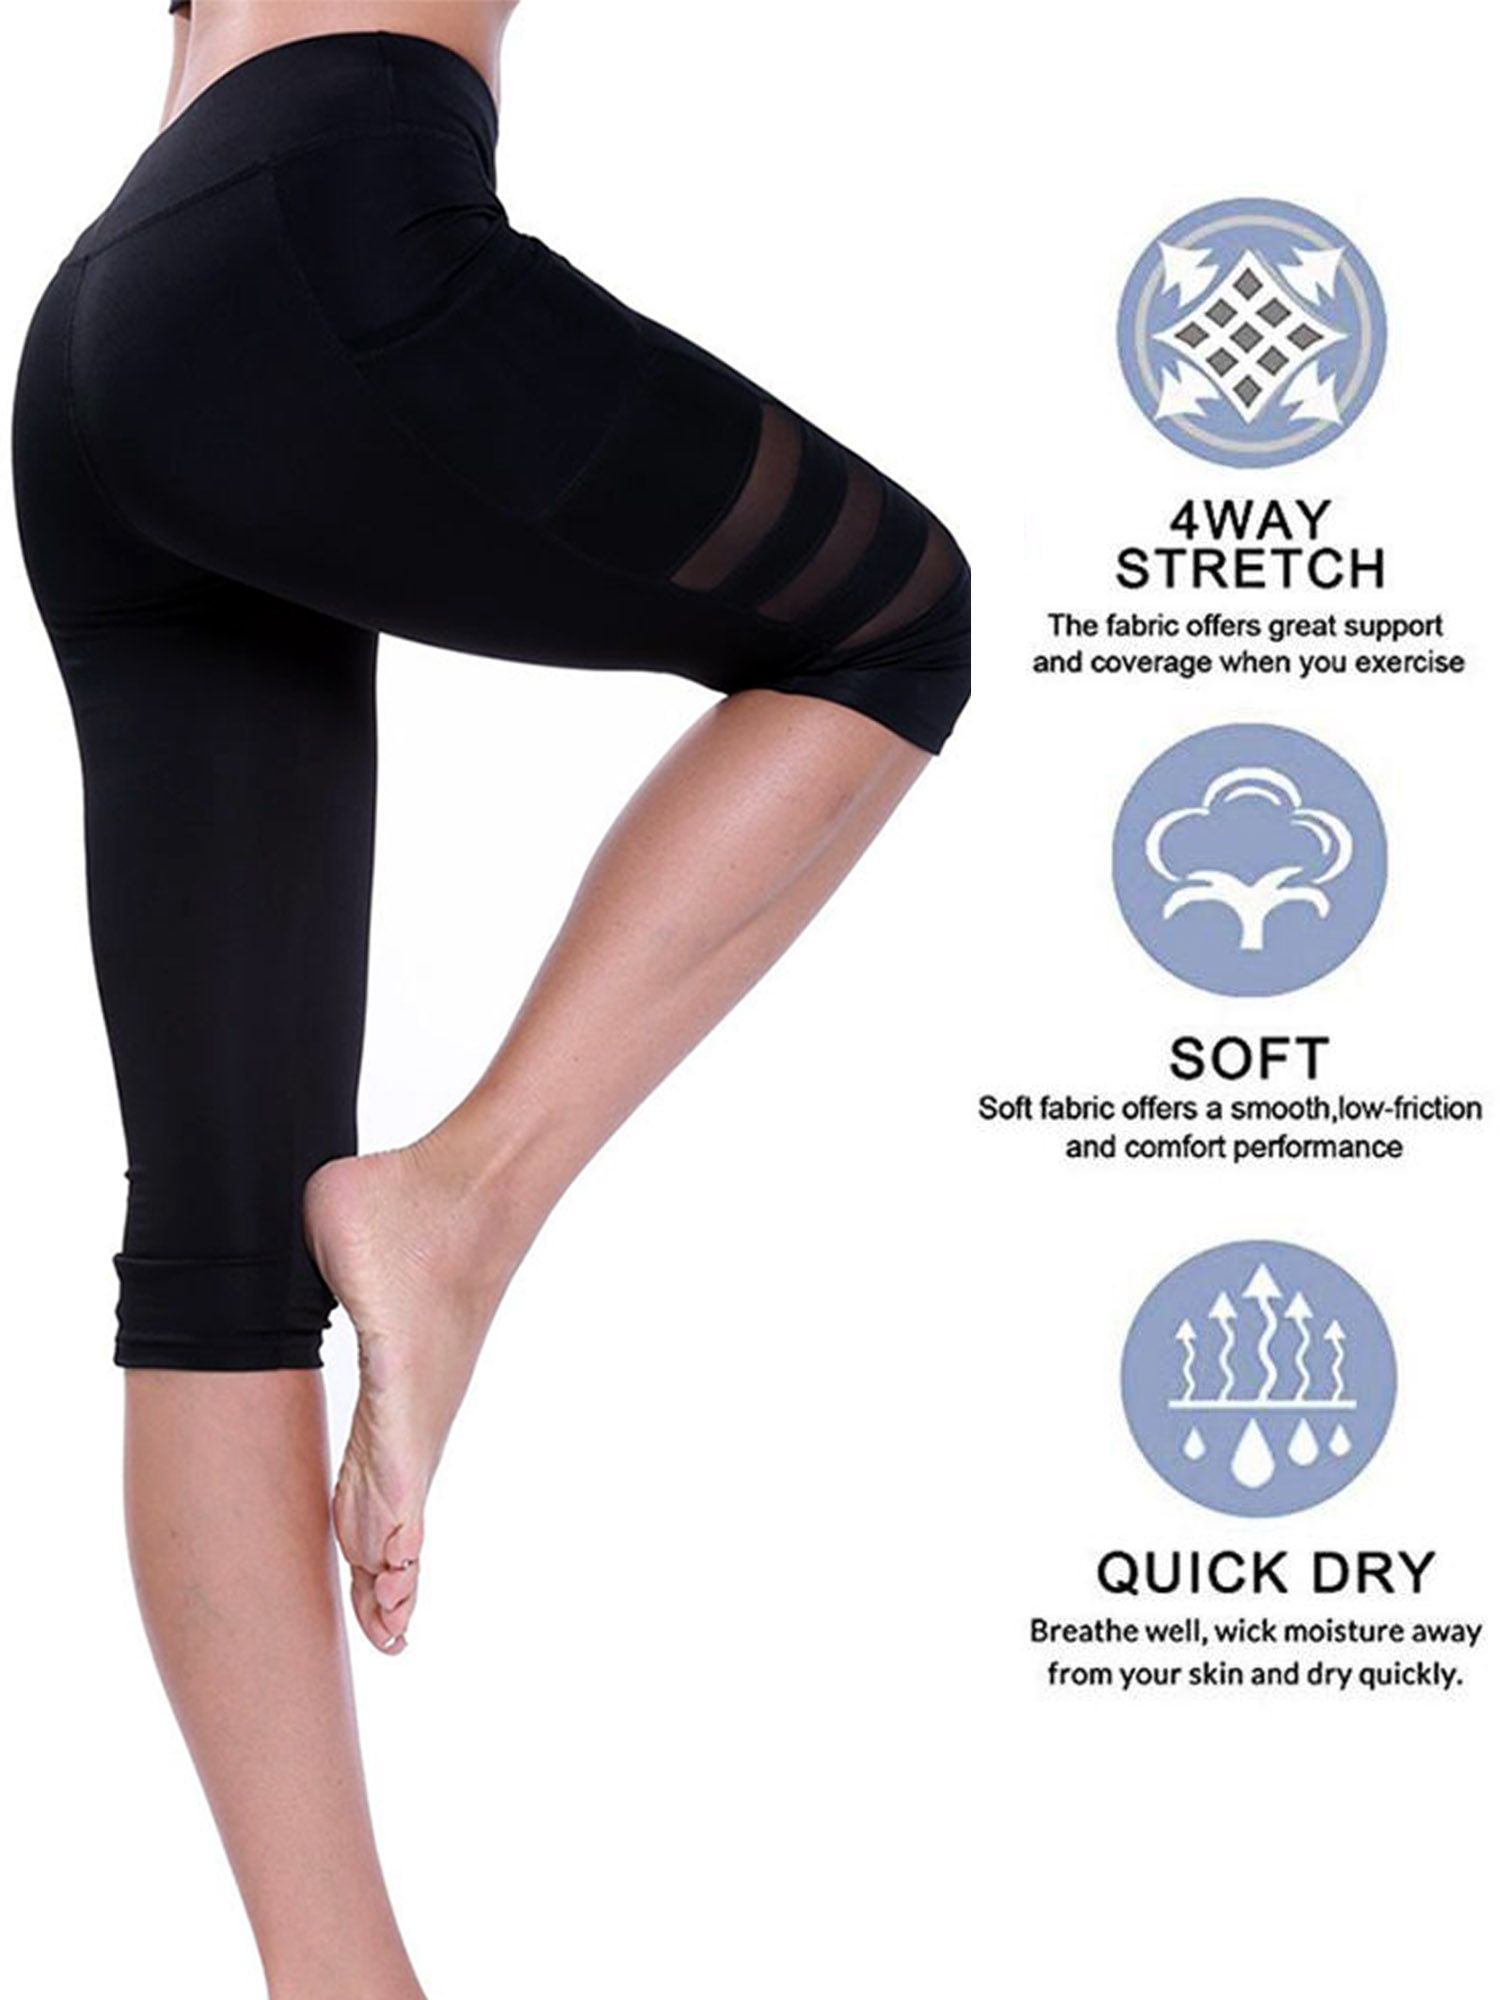 PULLIMORE Women's High Waist Yoga Pants Mesh Running Capri Pants with Side Pockets  Tummy Control Workout Running 4 Way Stretch Sport Leggings Size M 